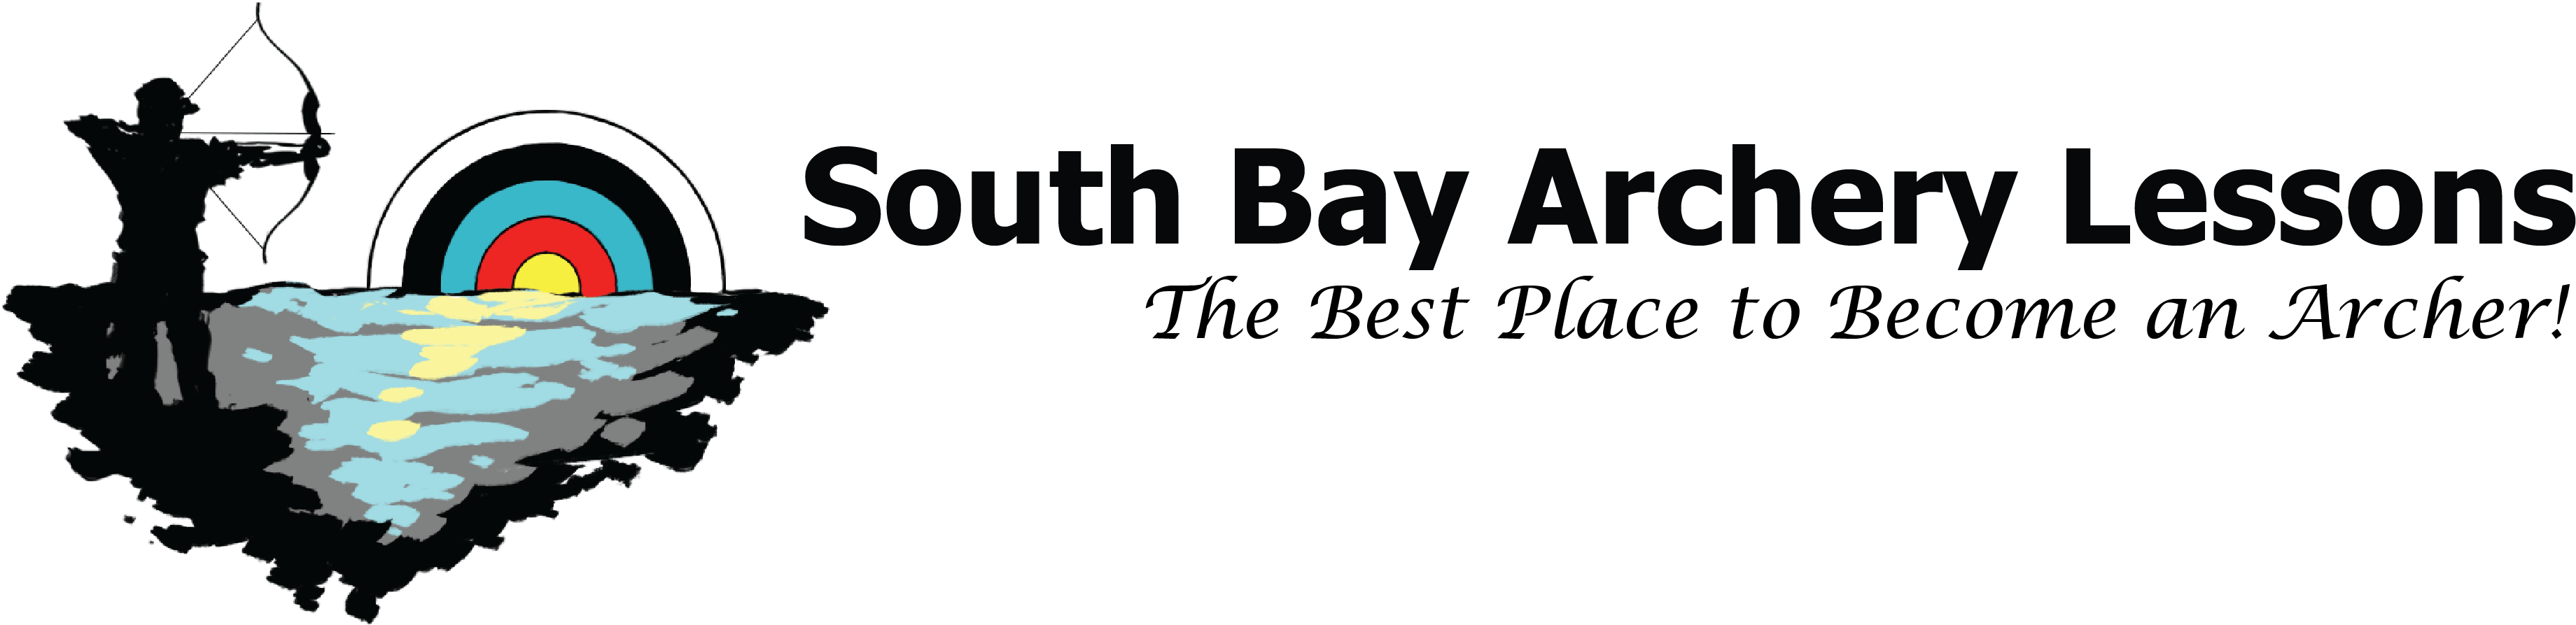 South Bay Archery Lessons - Bay Area Food Bank (3787x969), Png Download